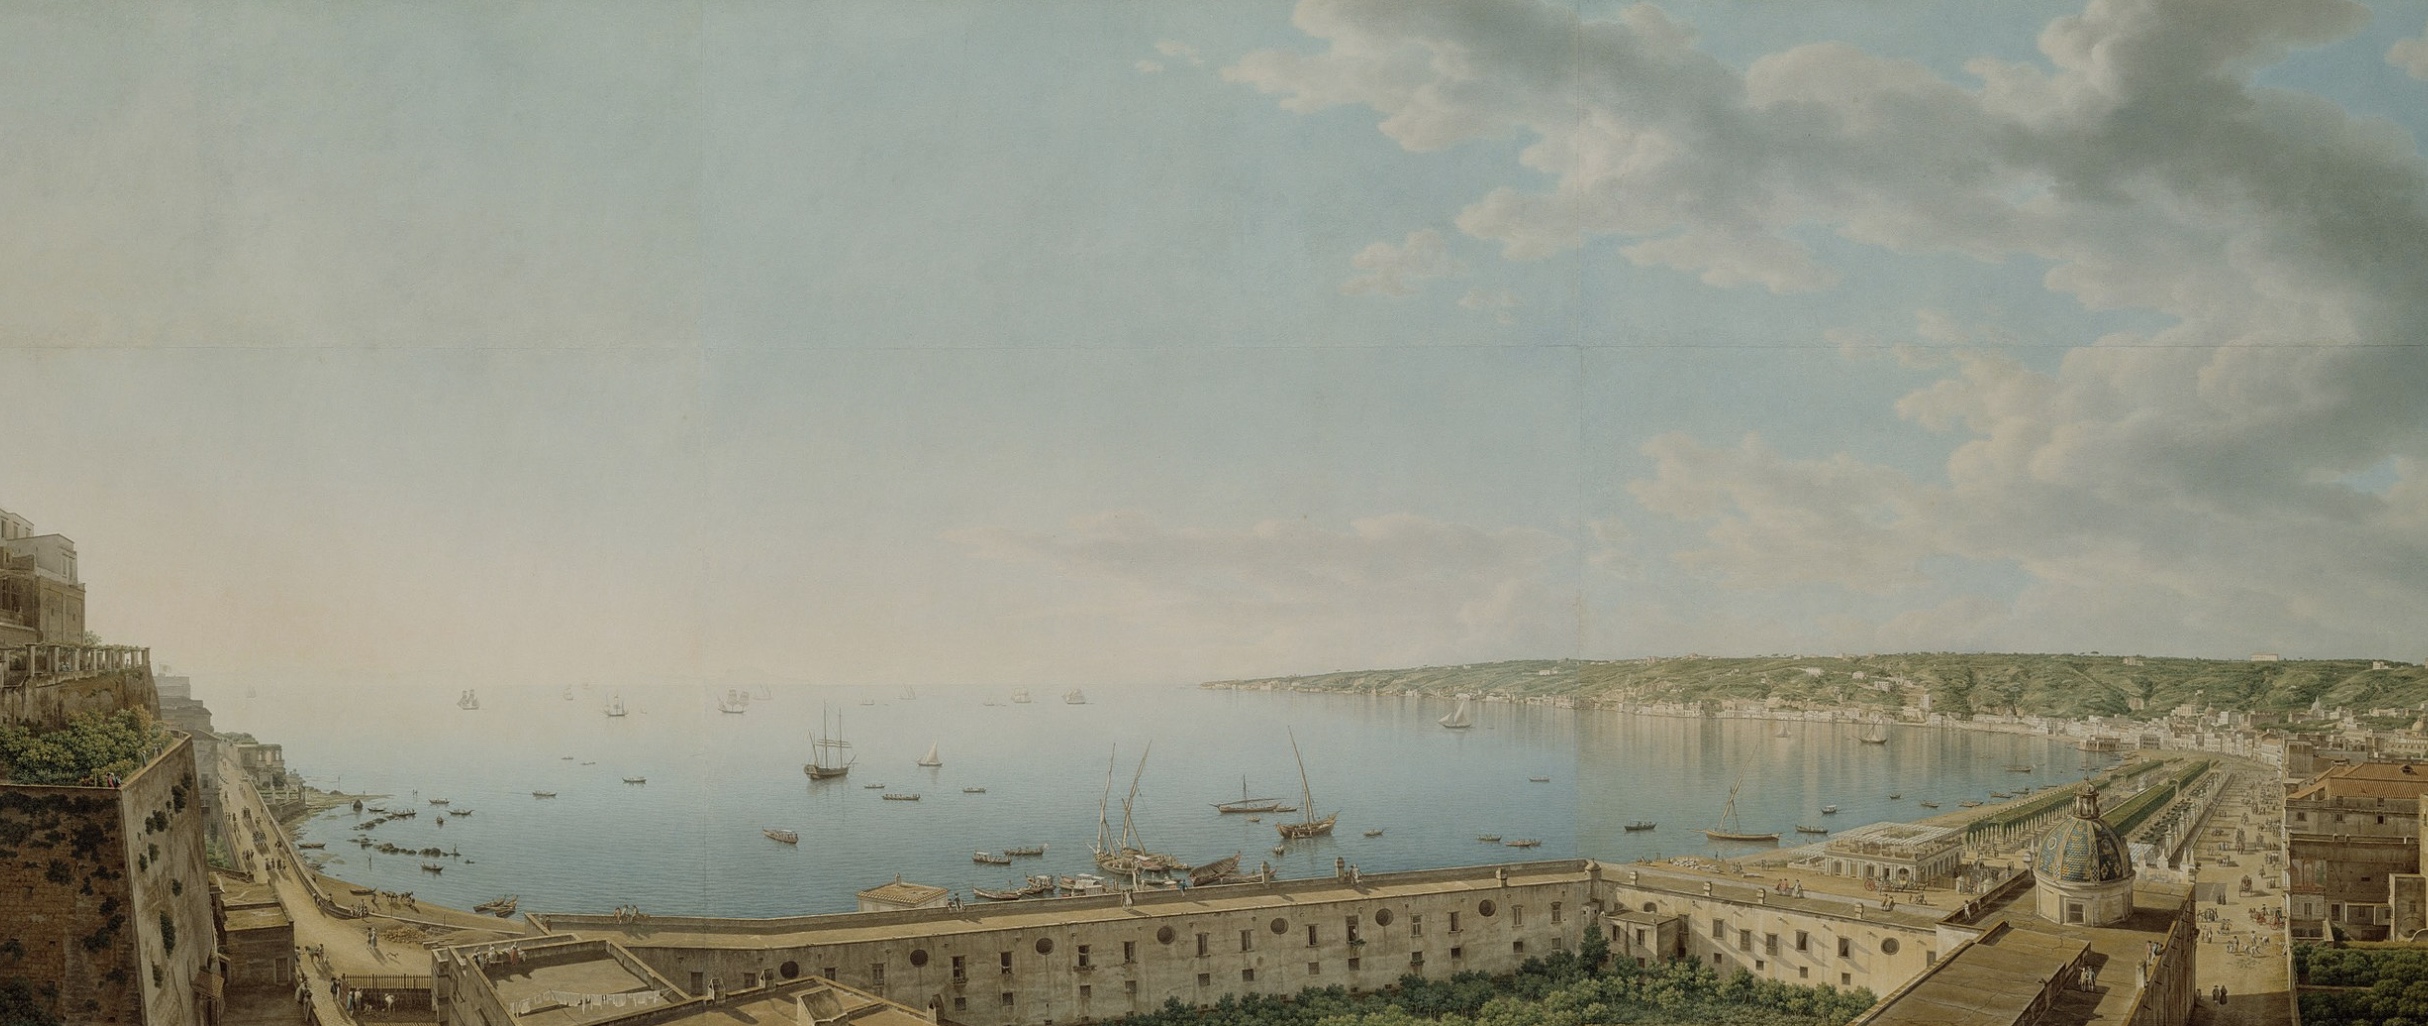 The Bay of Naples by Giovanni Battista Lusier, 1791 (Getty Museum). Keats felt too
        ill to give an account of its beauty.